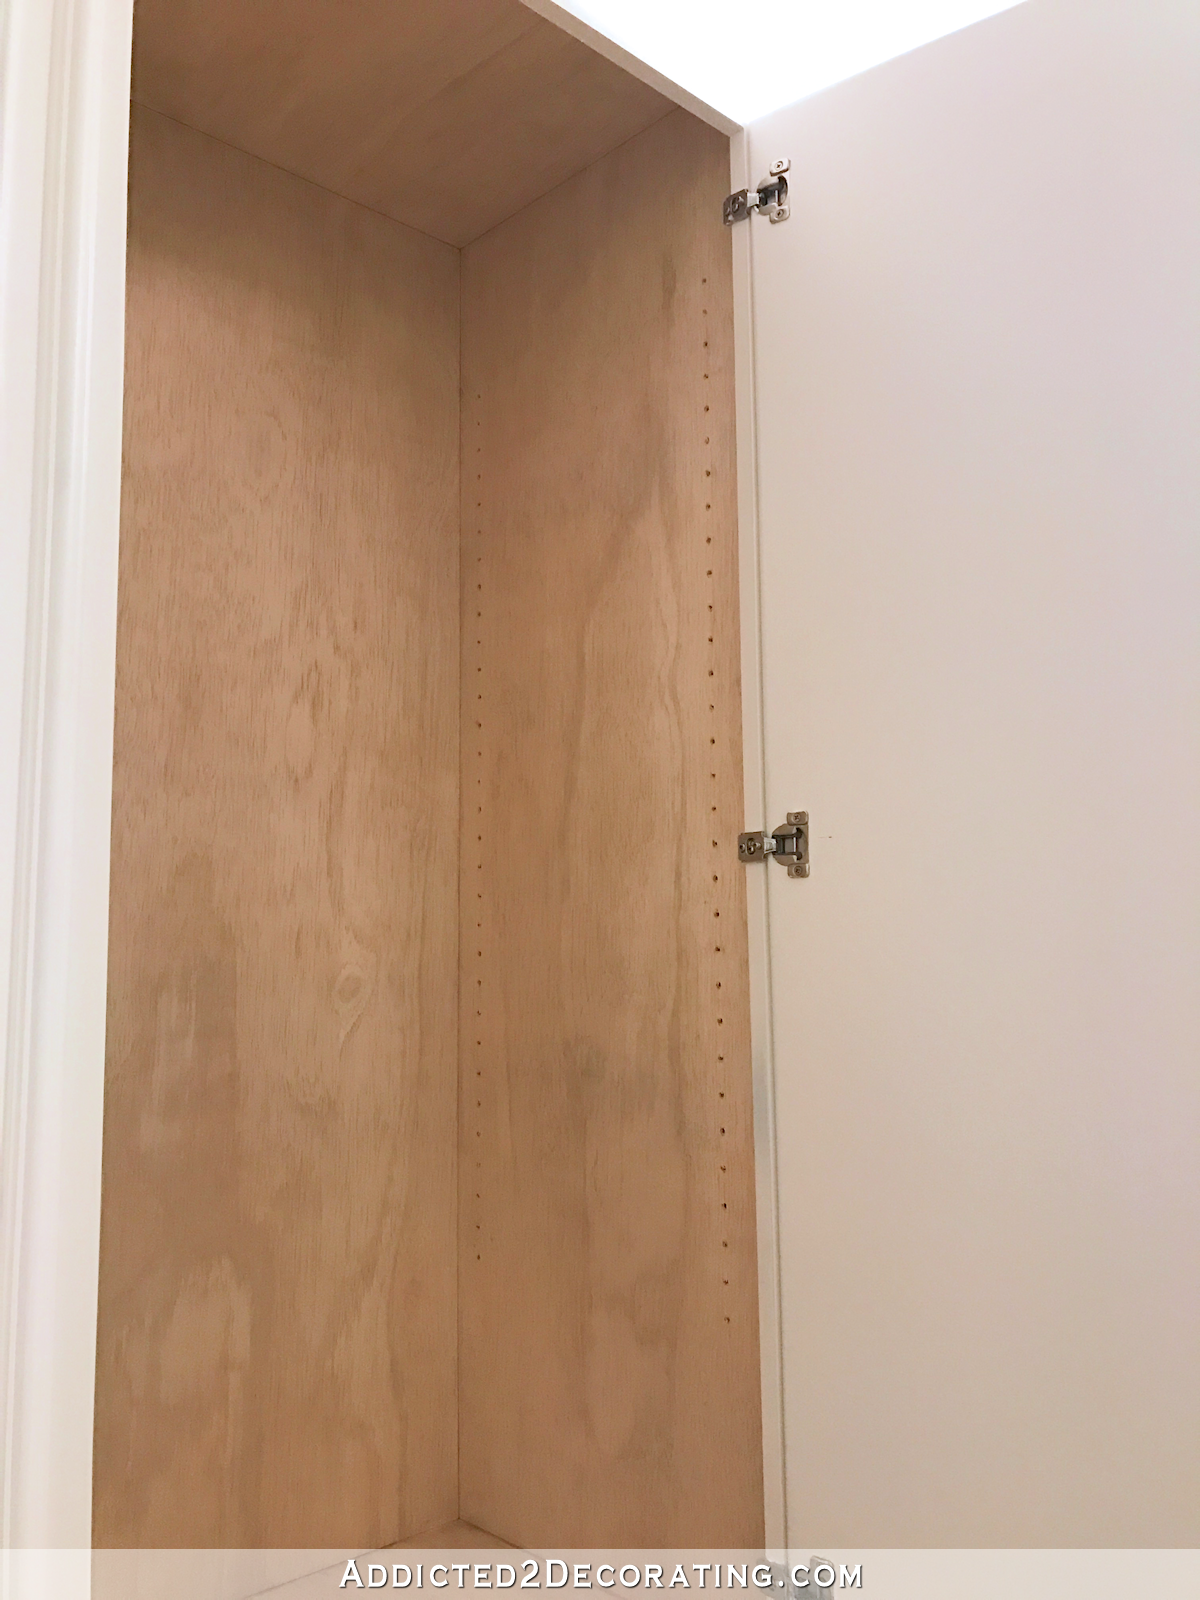 finished hallway cabinets - interior of upper cabinet with polyurethaned natural color plywood